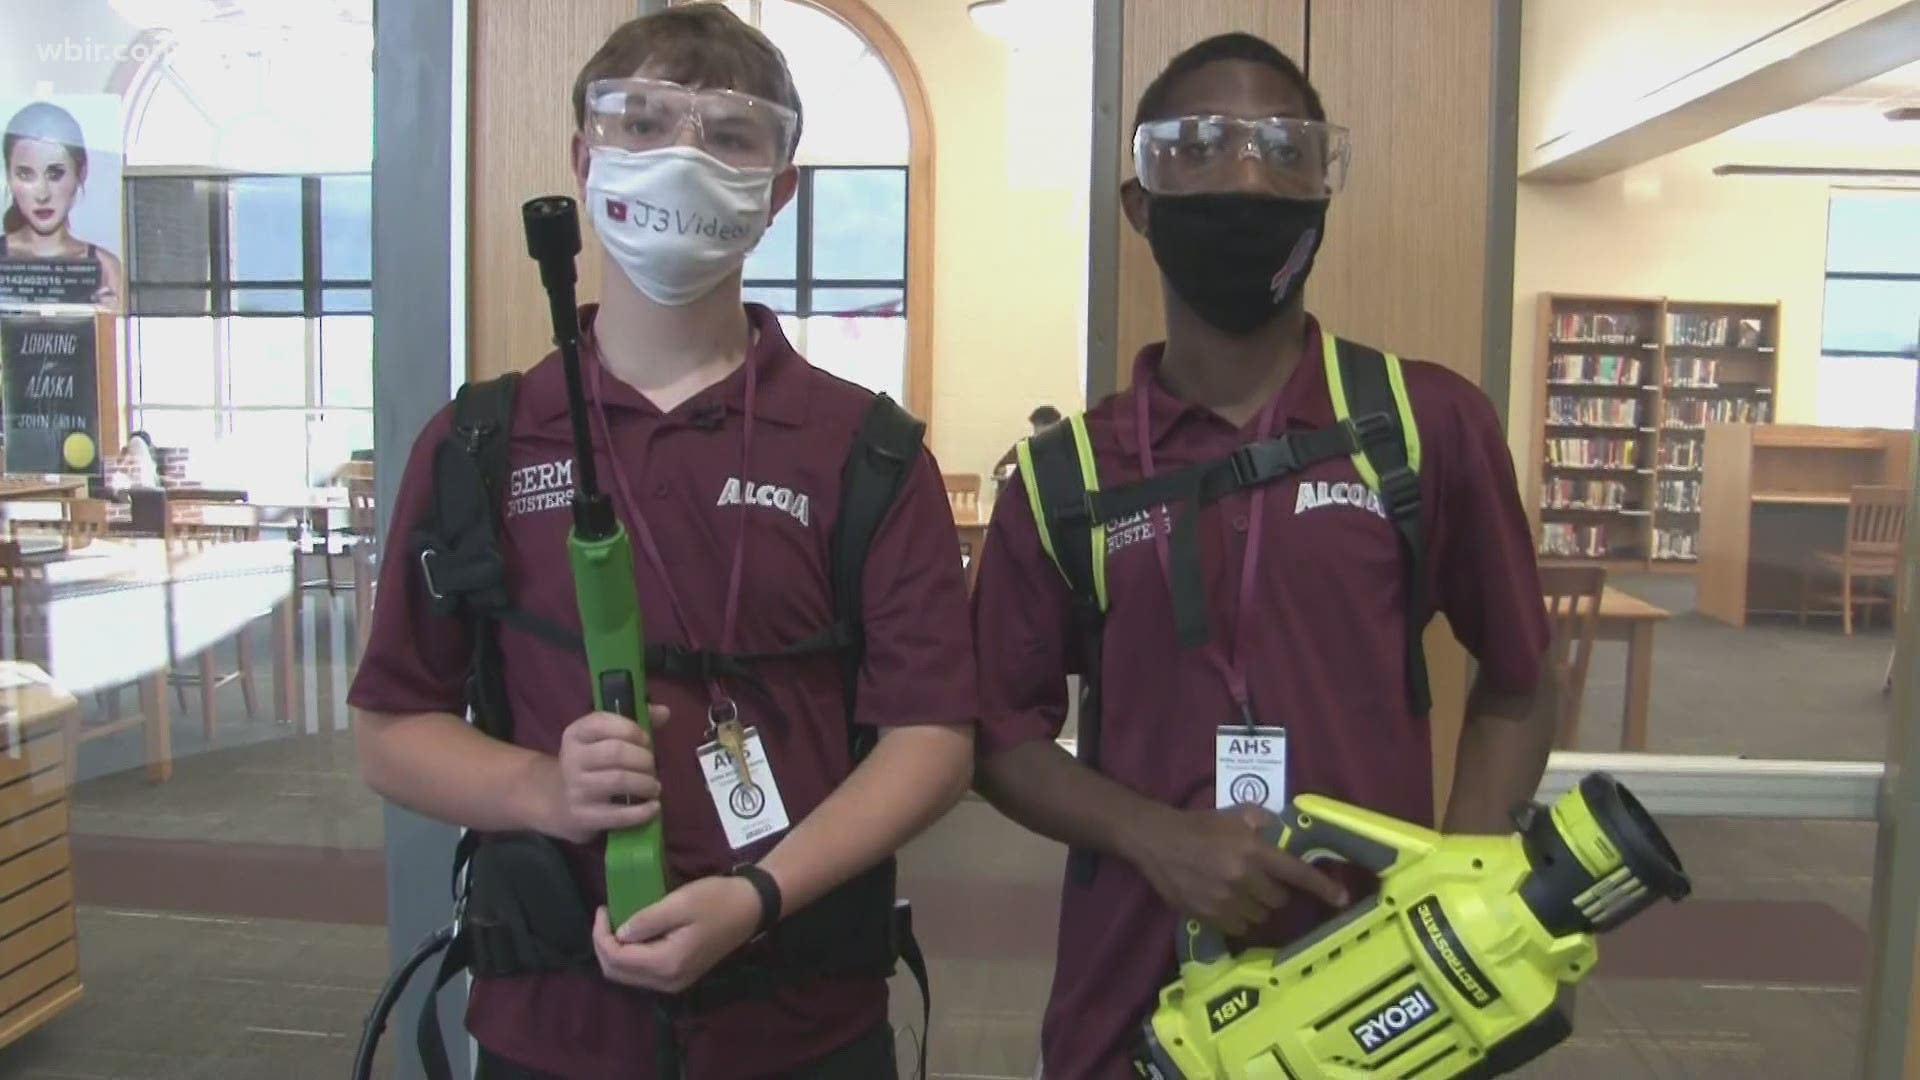 Forget Ghostbusters, these two special education students at Alcoa High School are on the Alcoa City Schools payroll to be the "Germ Busters!"